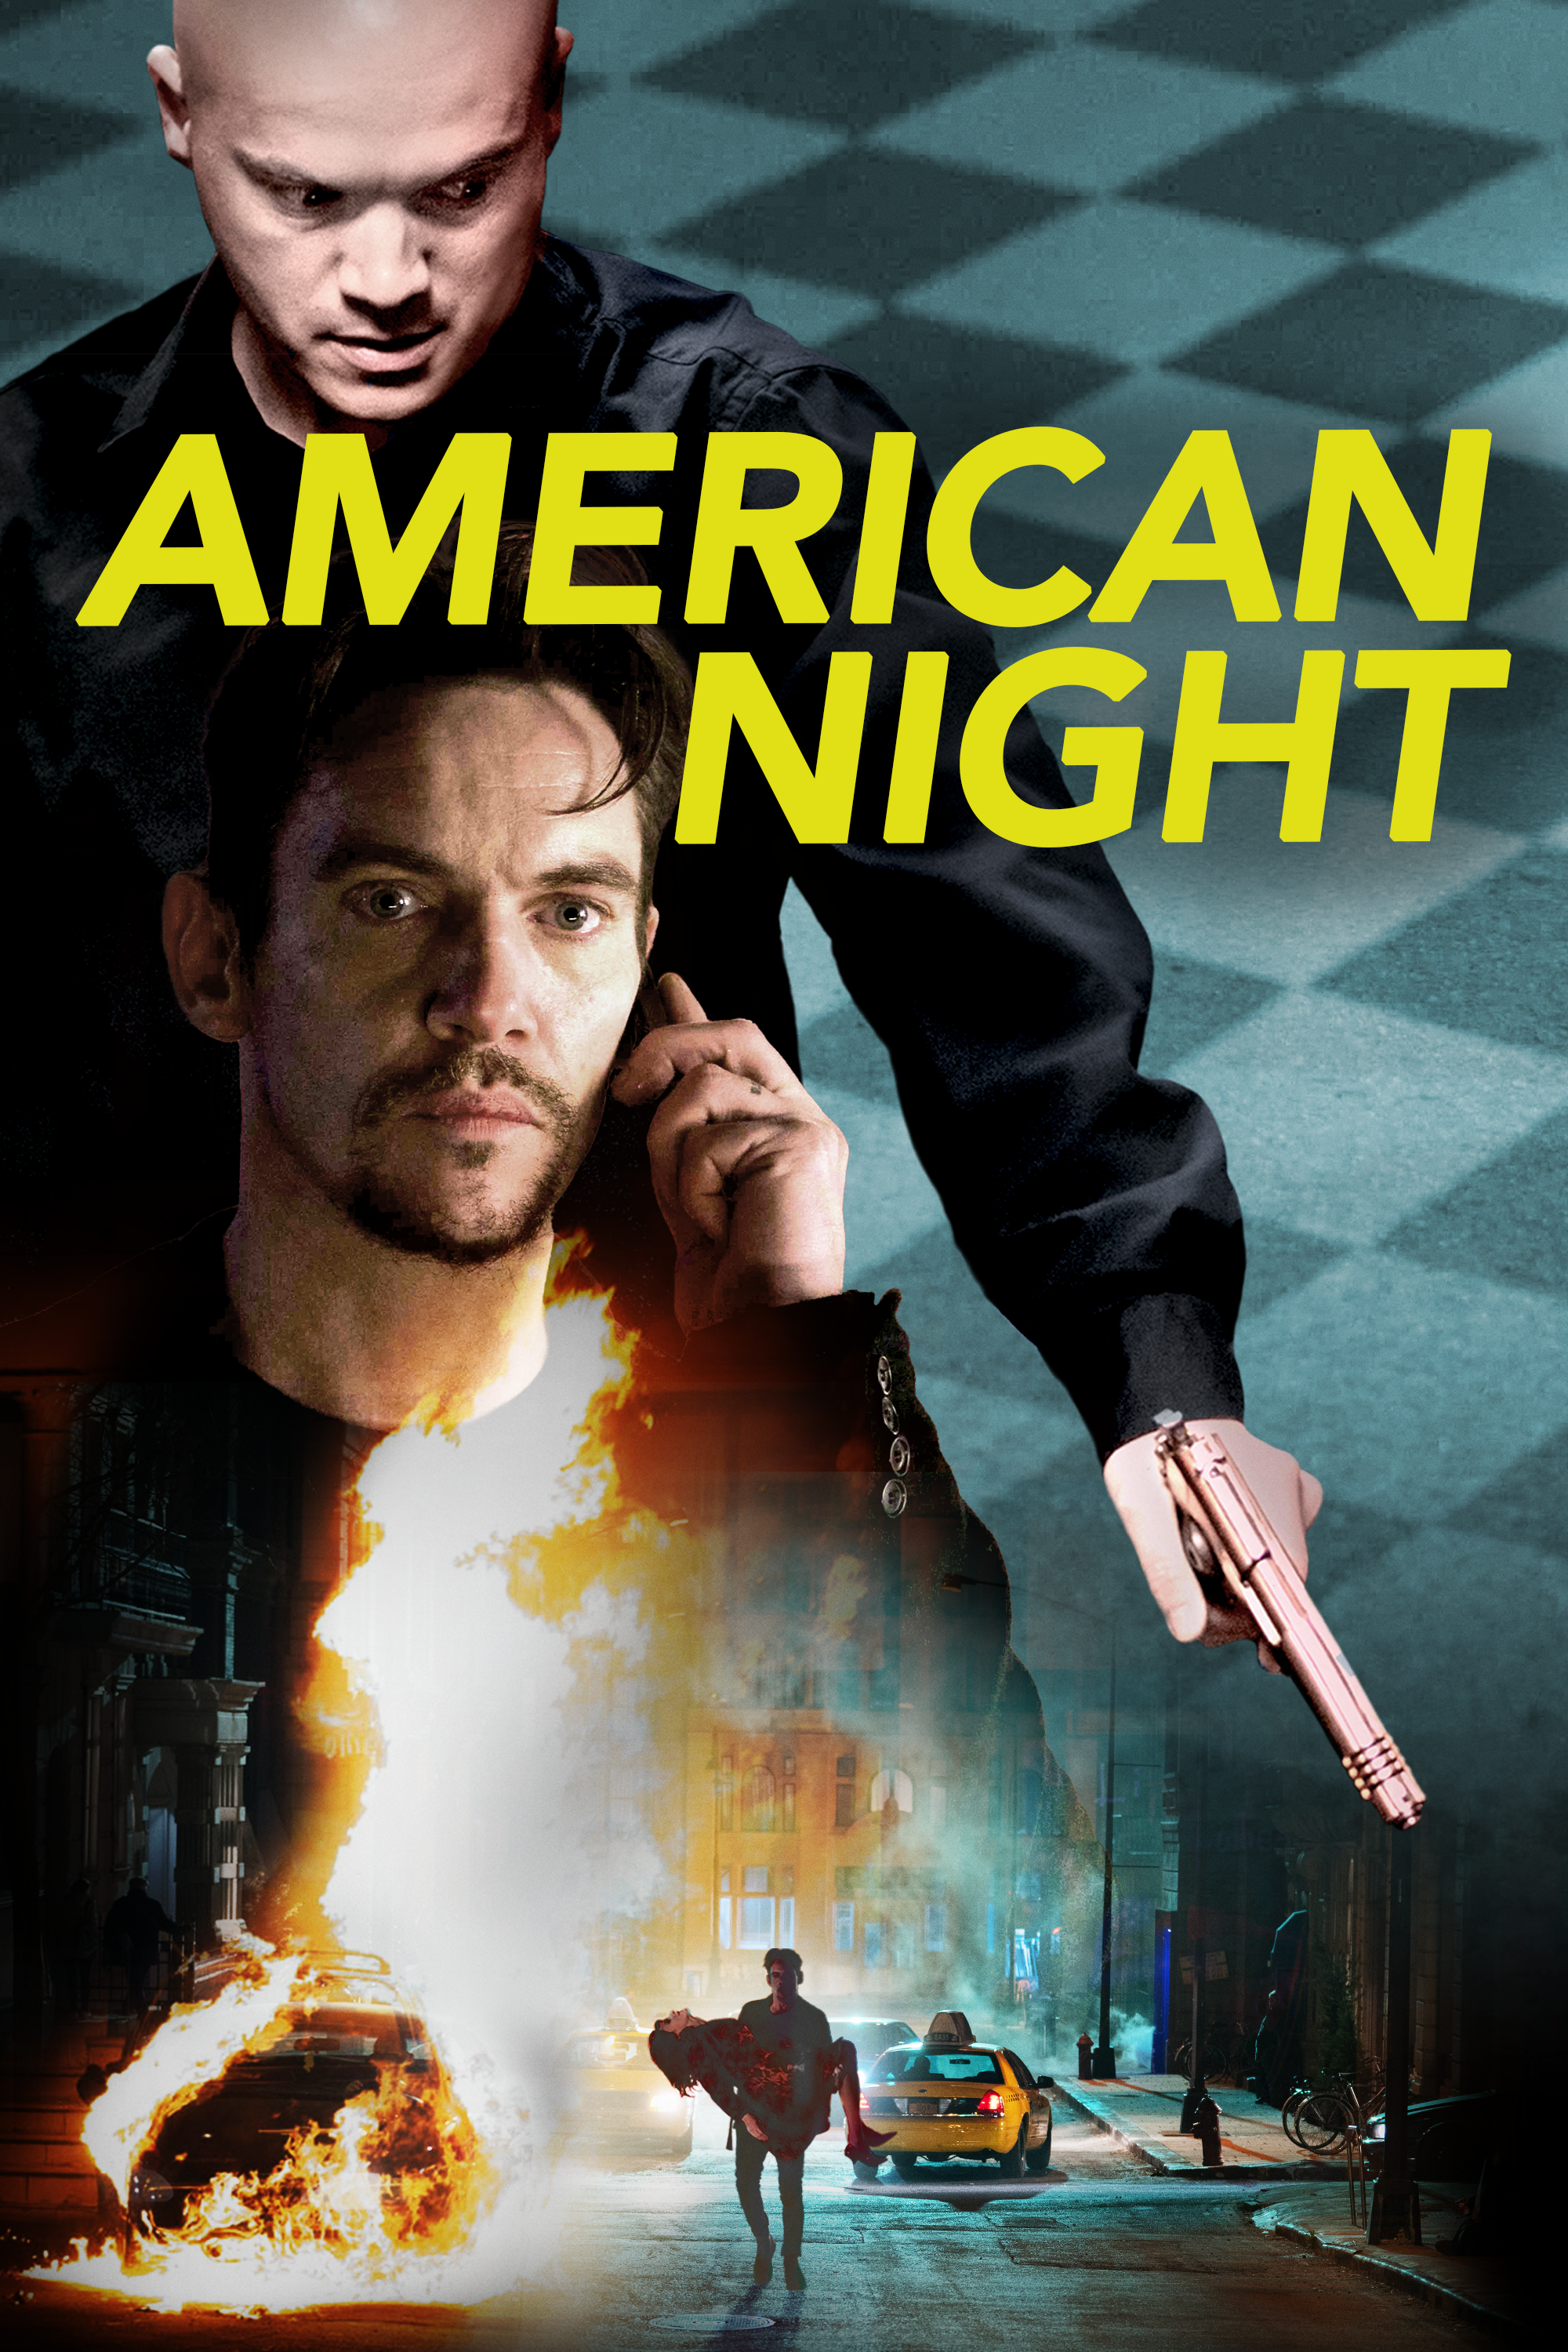 American Night review